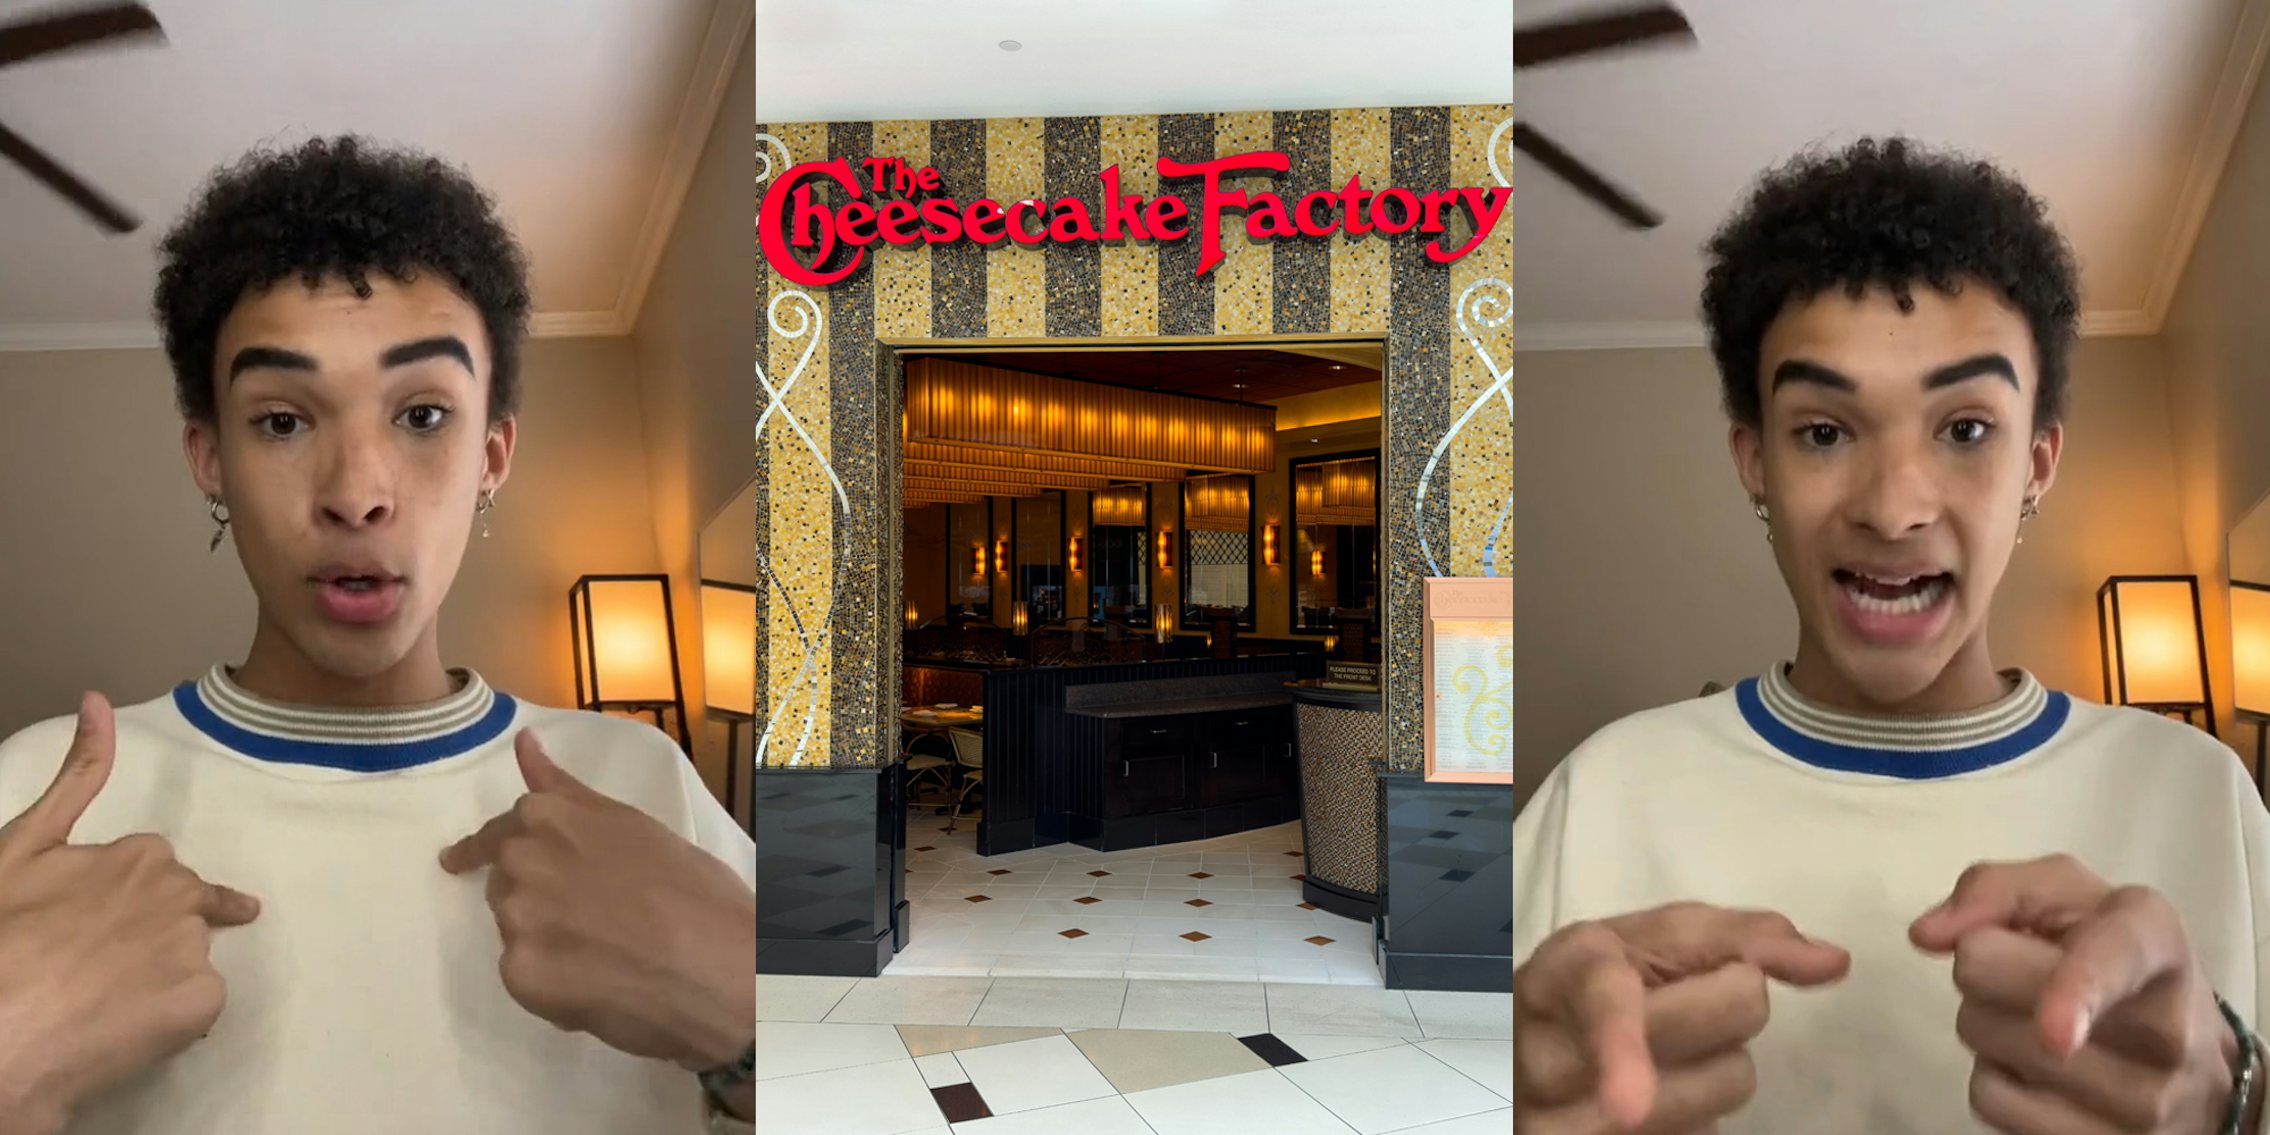 person speaking pointing to chest (l) The Cheesecake Factory entrance with sign (c) person speaking pointing to camera (r)